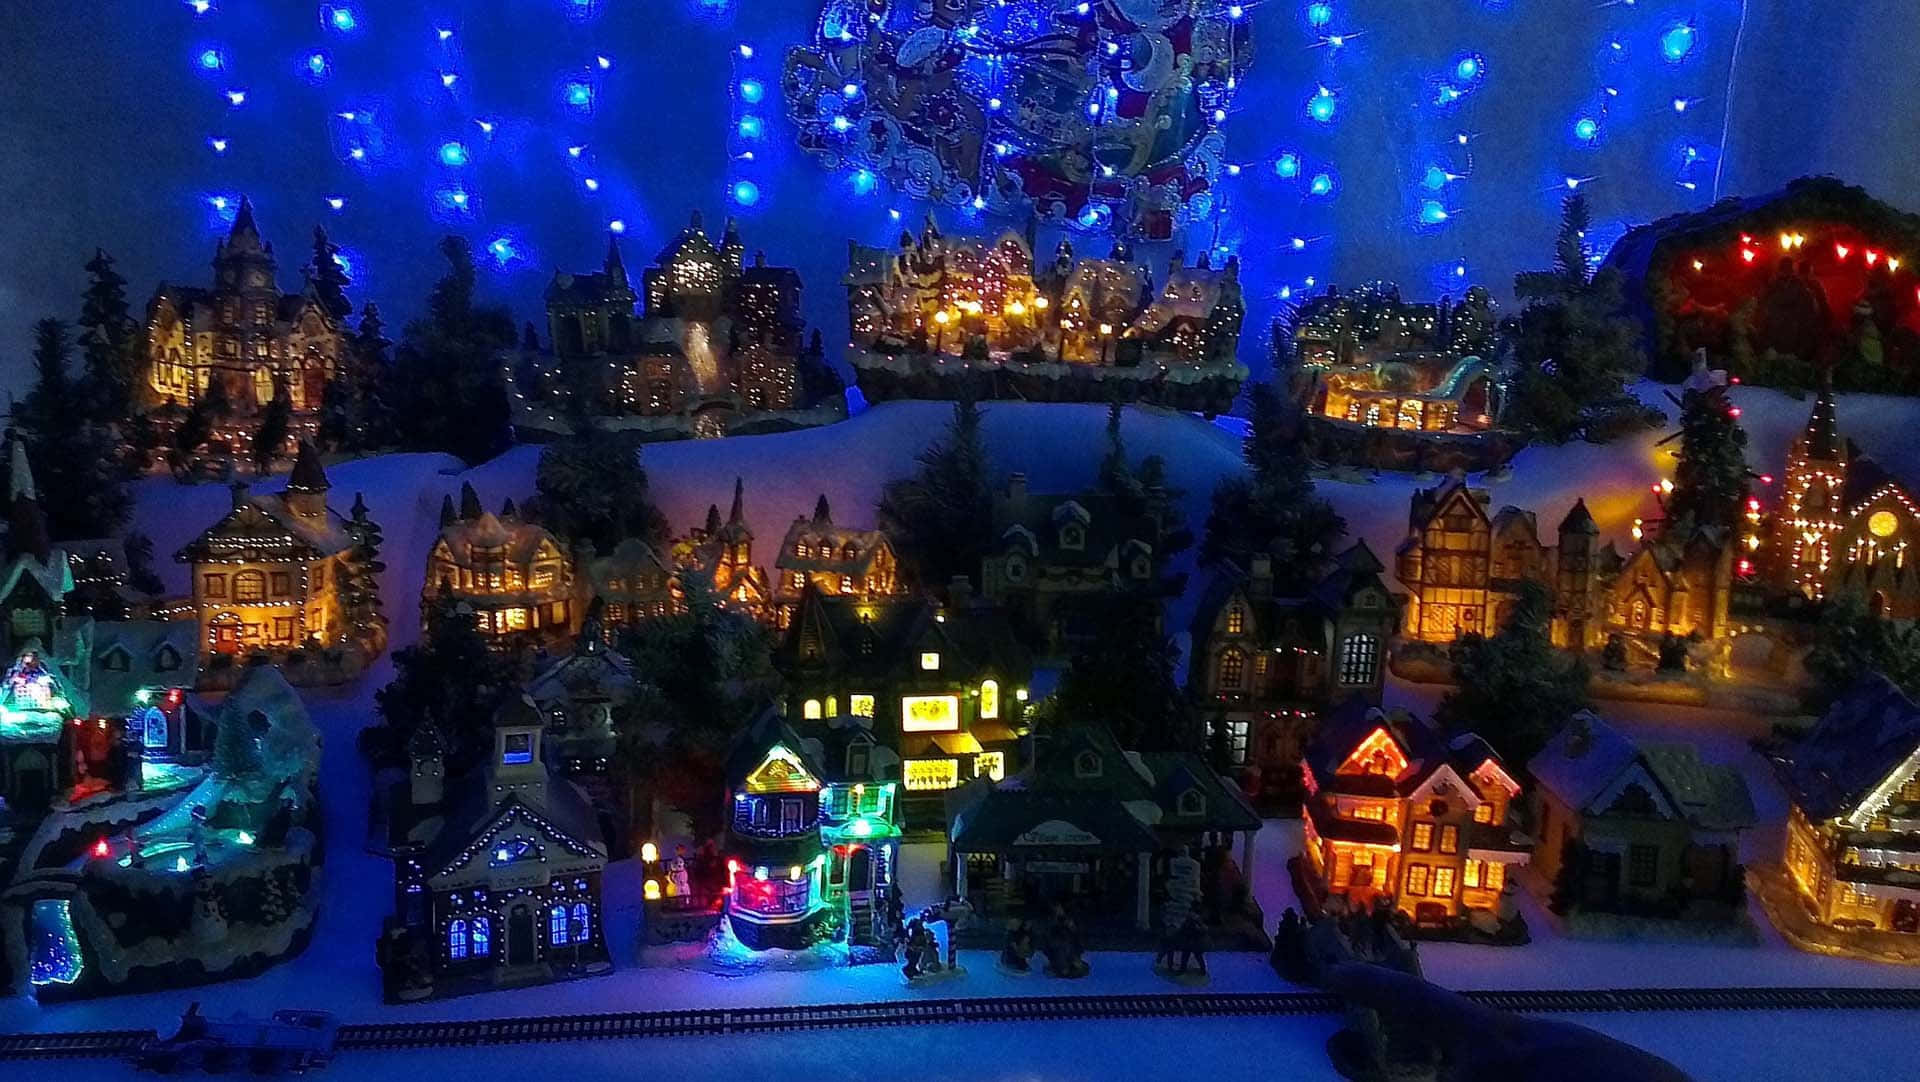 Spend your holidays in a magical Christmas Village Wallpaper